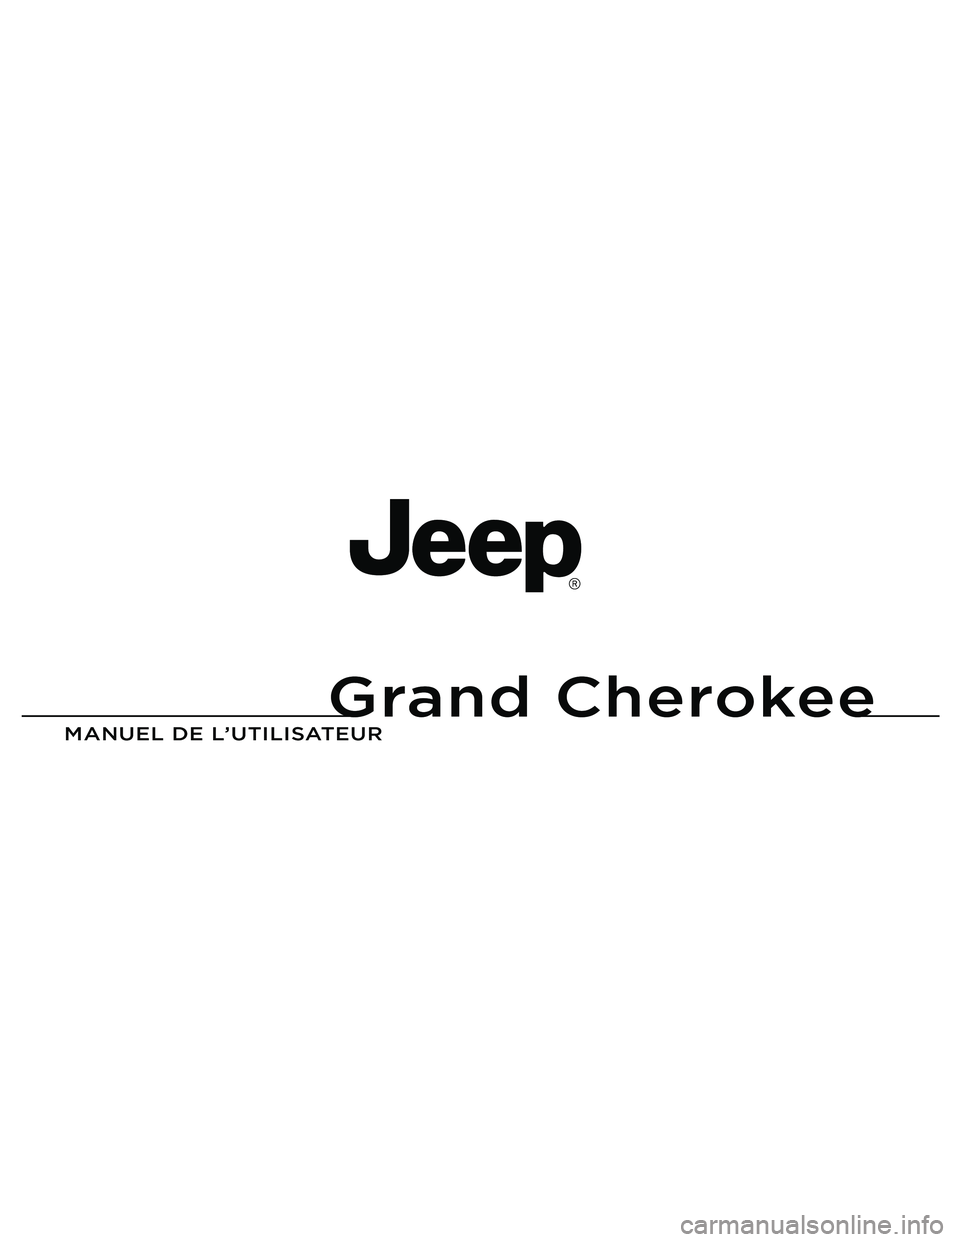 JEEP GRAND CHEROKEE 2016  Notice dentretien (in French) 